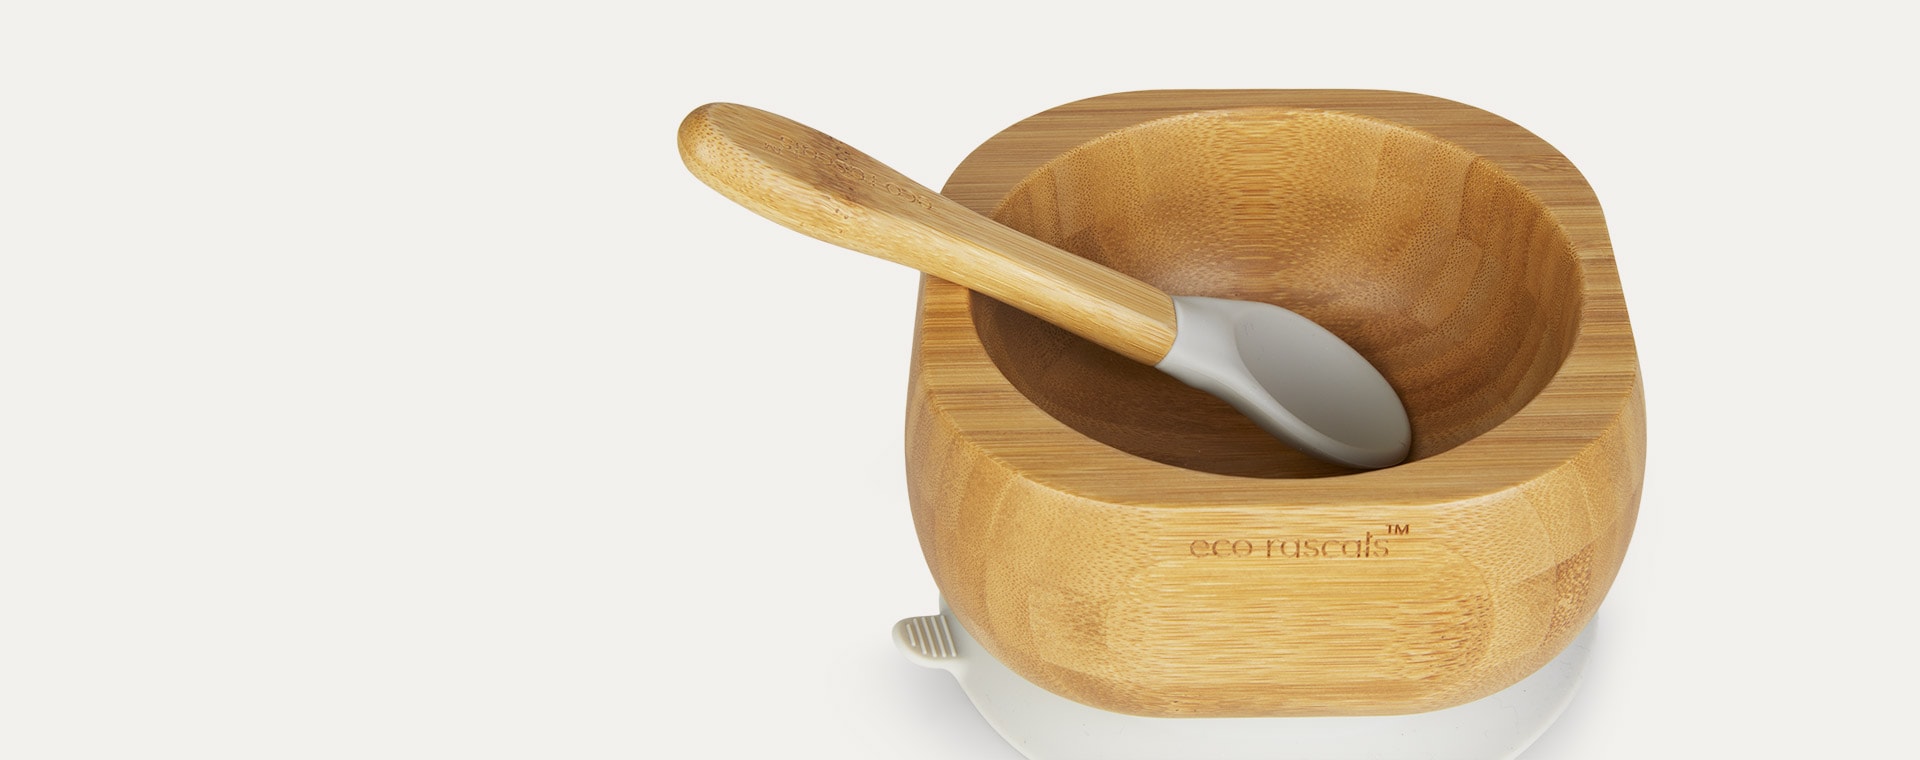 Grey eco rascals Bamboo Suction Bowl and Spoon Set